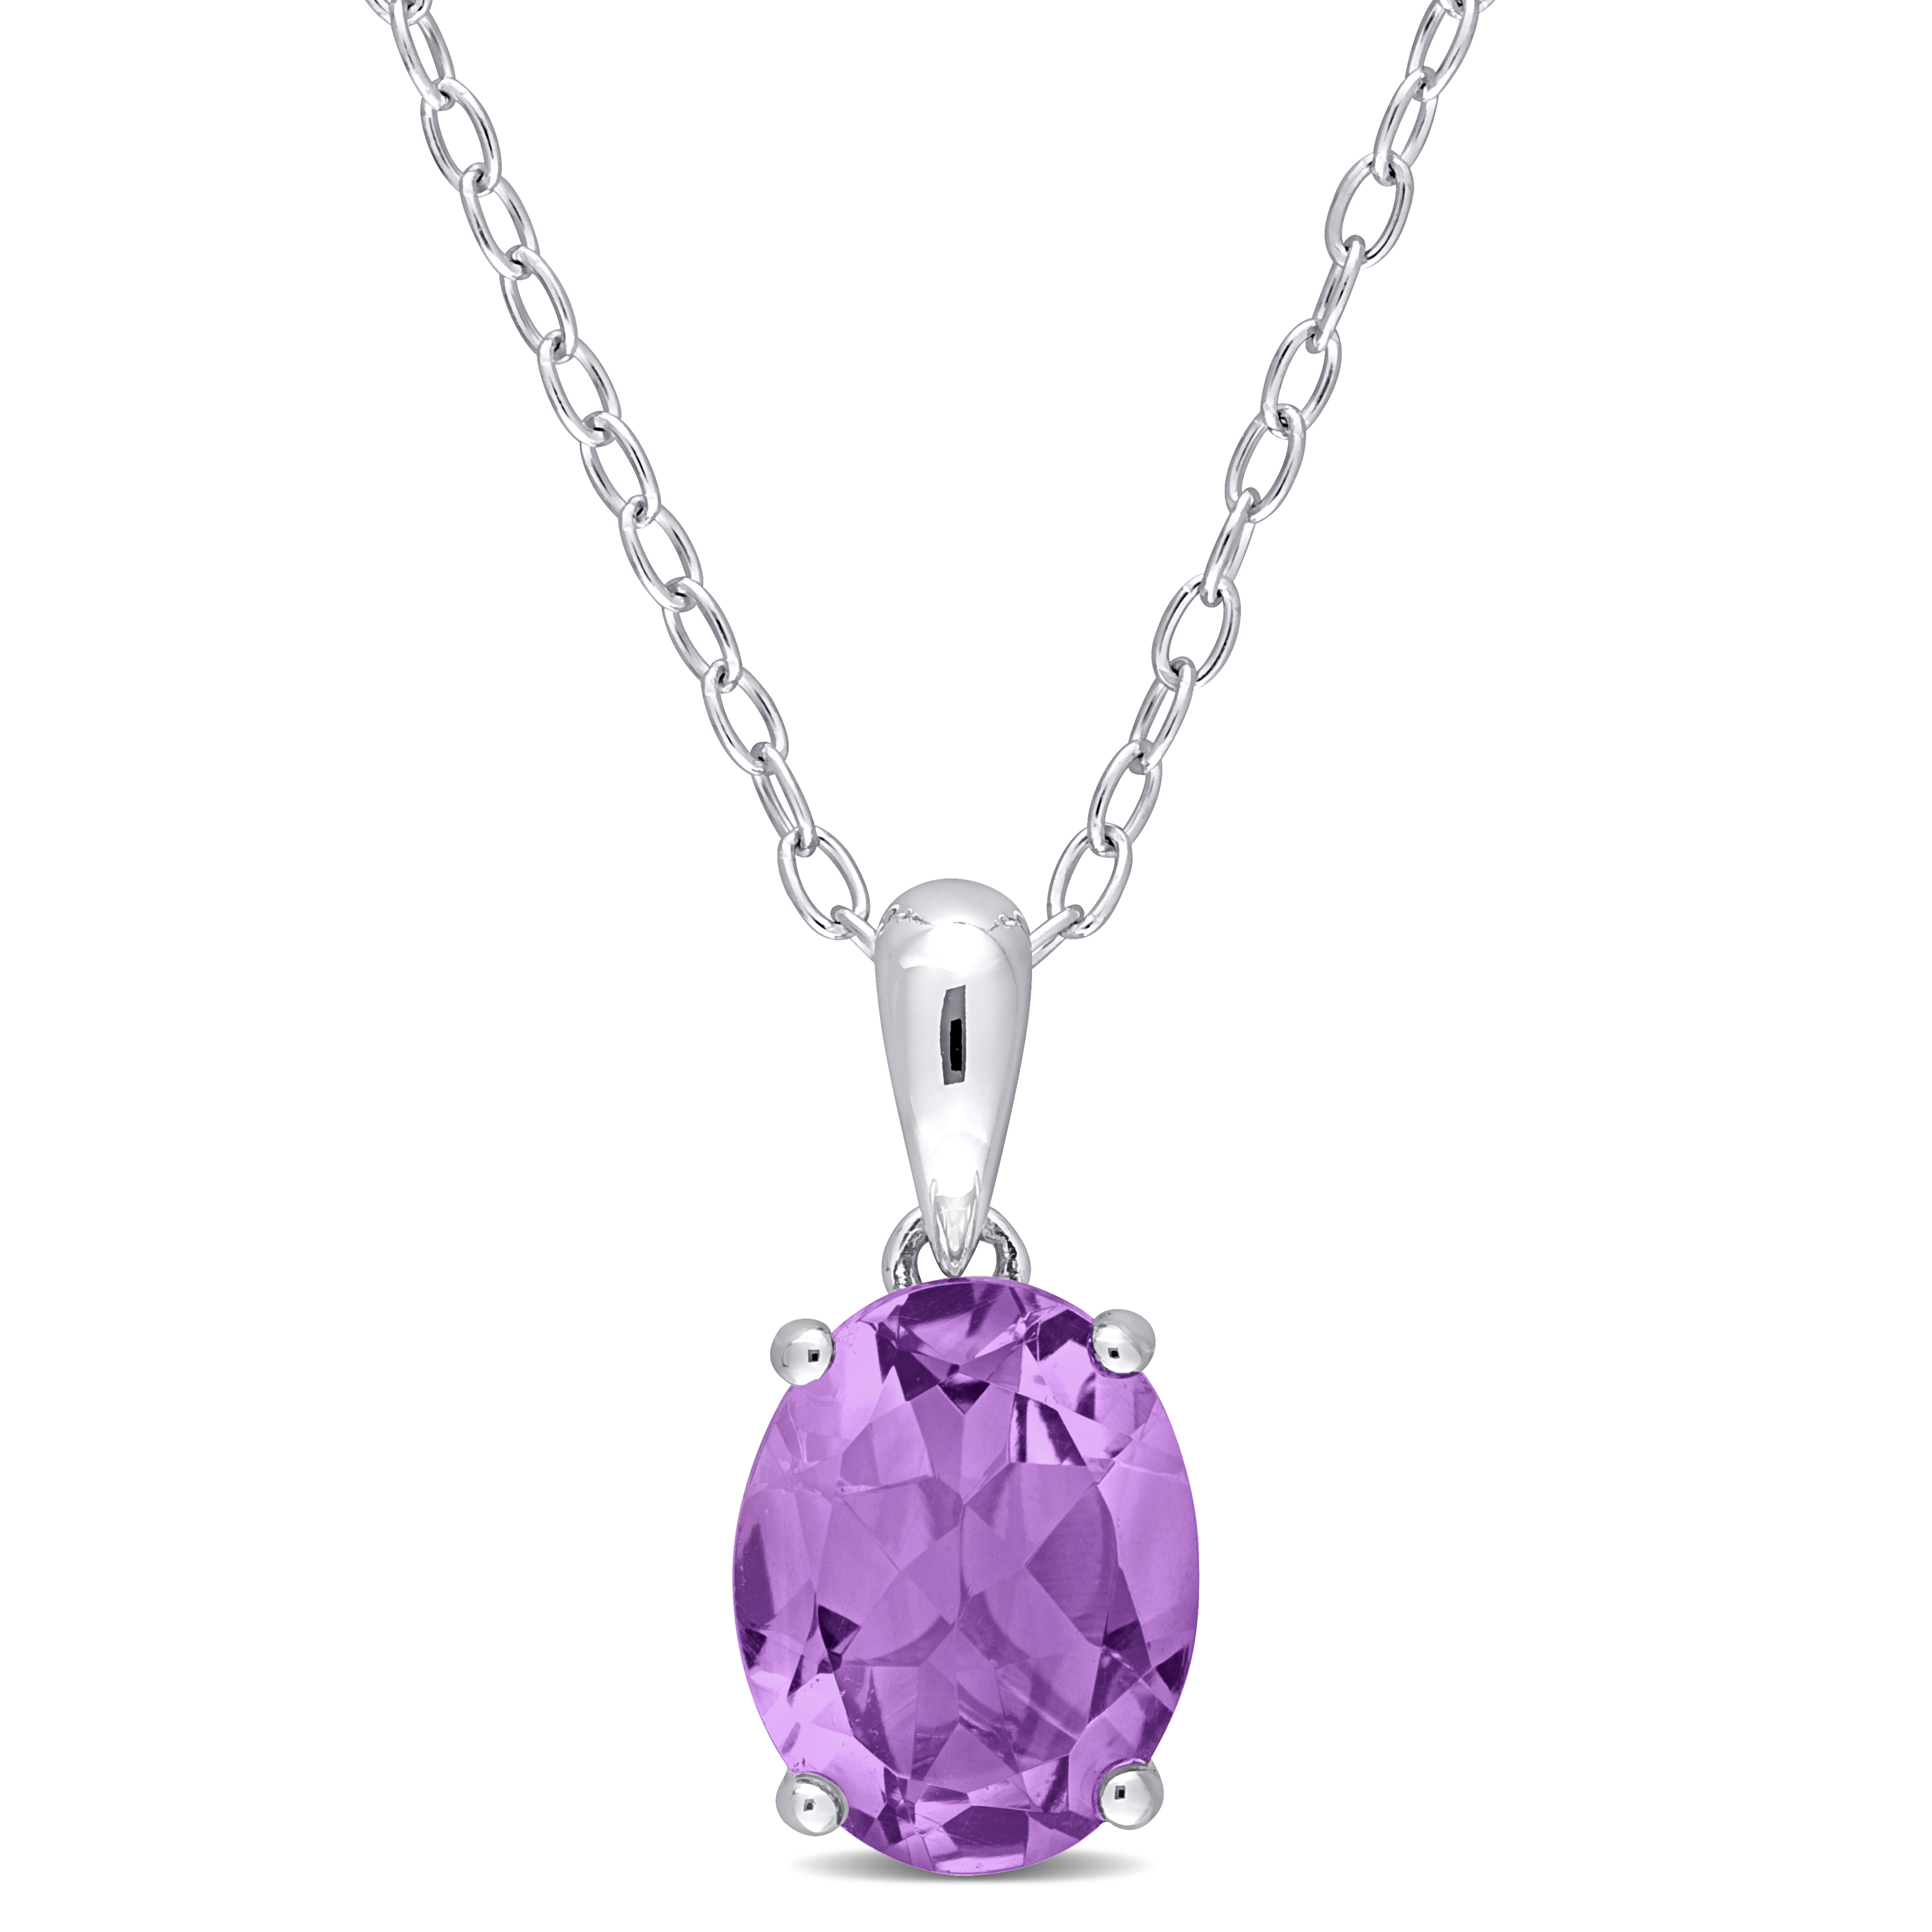 2 CT TGW Oval Amethyst Solitaire Heart Design Pendant with Chain in Sterling Silver - 18 in.